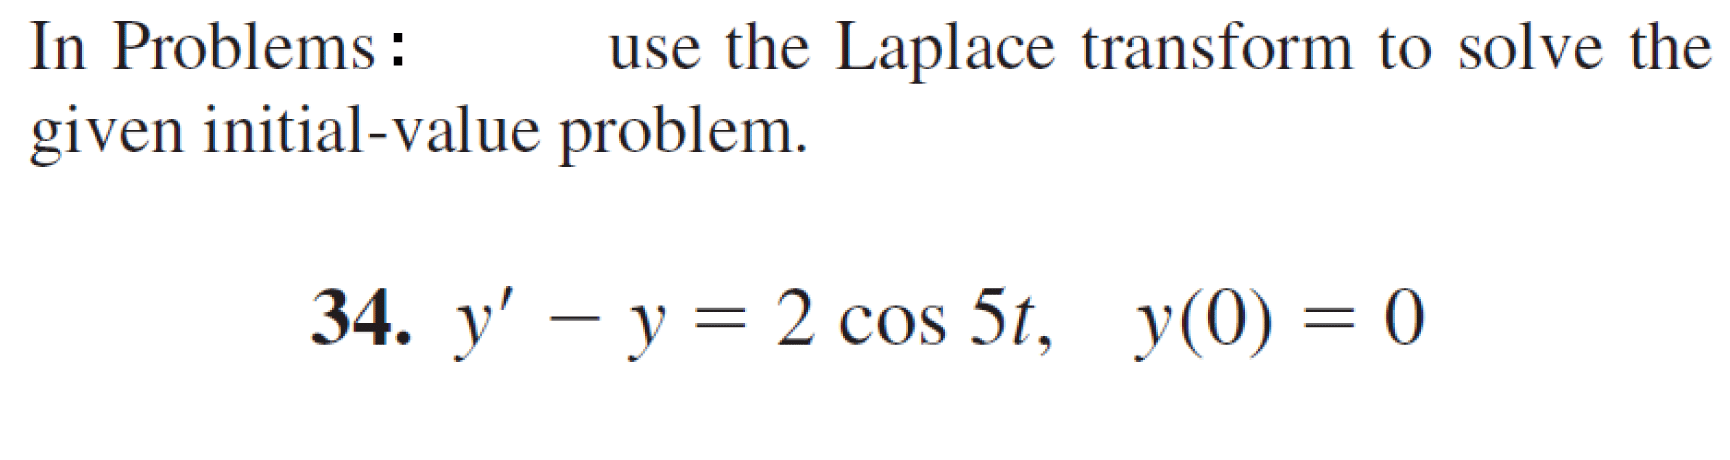 In Problems :
given initial-value problem.
use the Laplace transform to solve the
34. y' – y = 2 cos 5t, y(0) = 0
